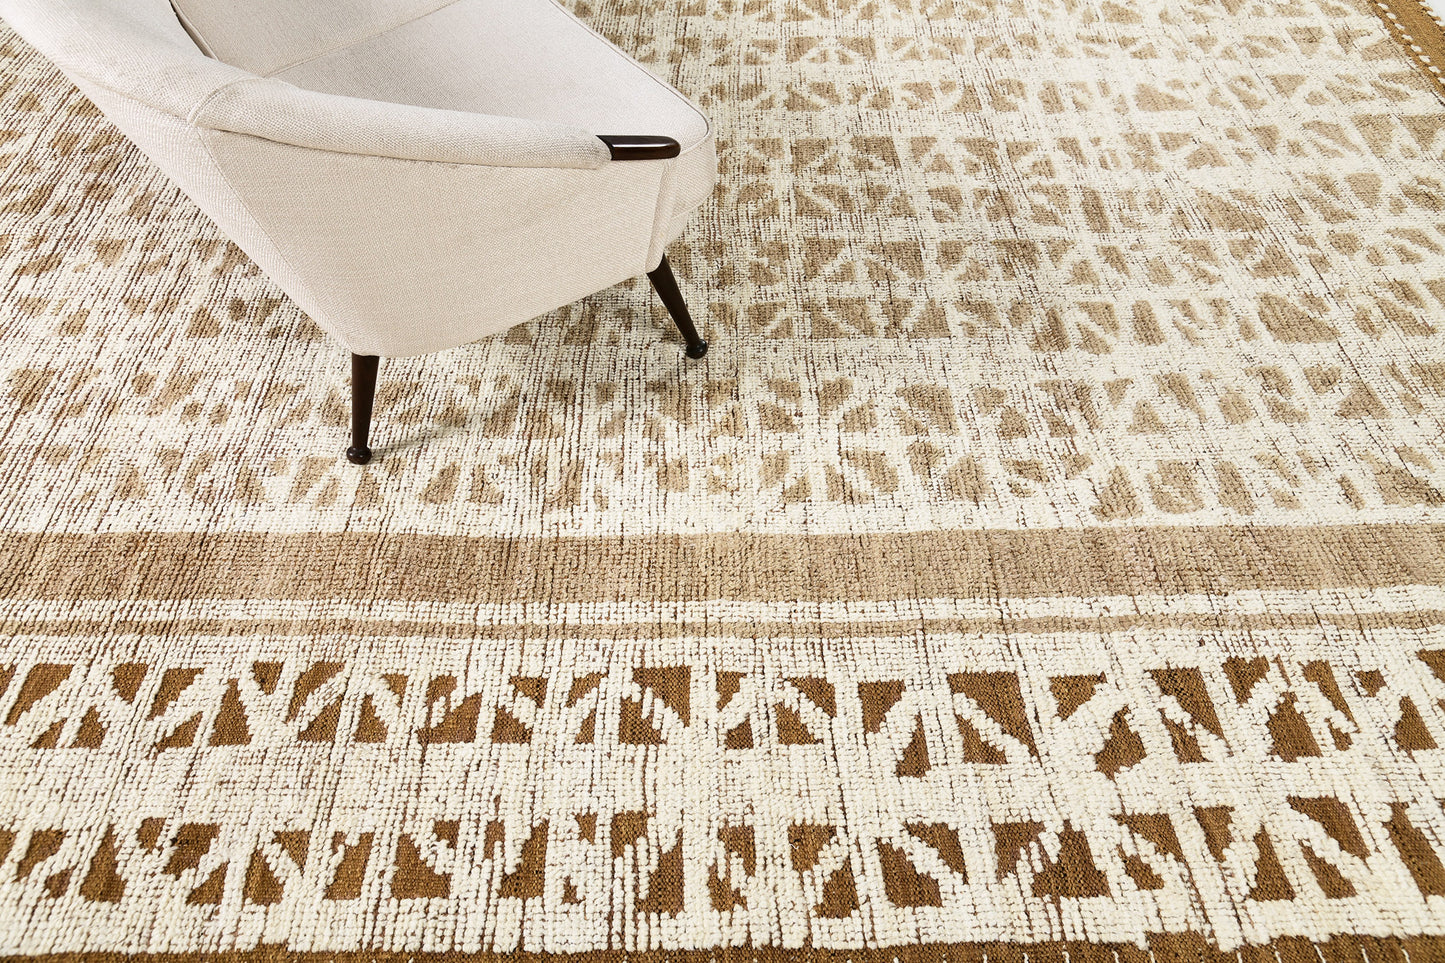 Modern Rug Image 5178 Hoopo, Nomad Collection